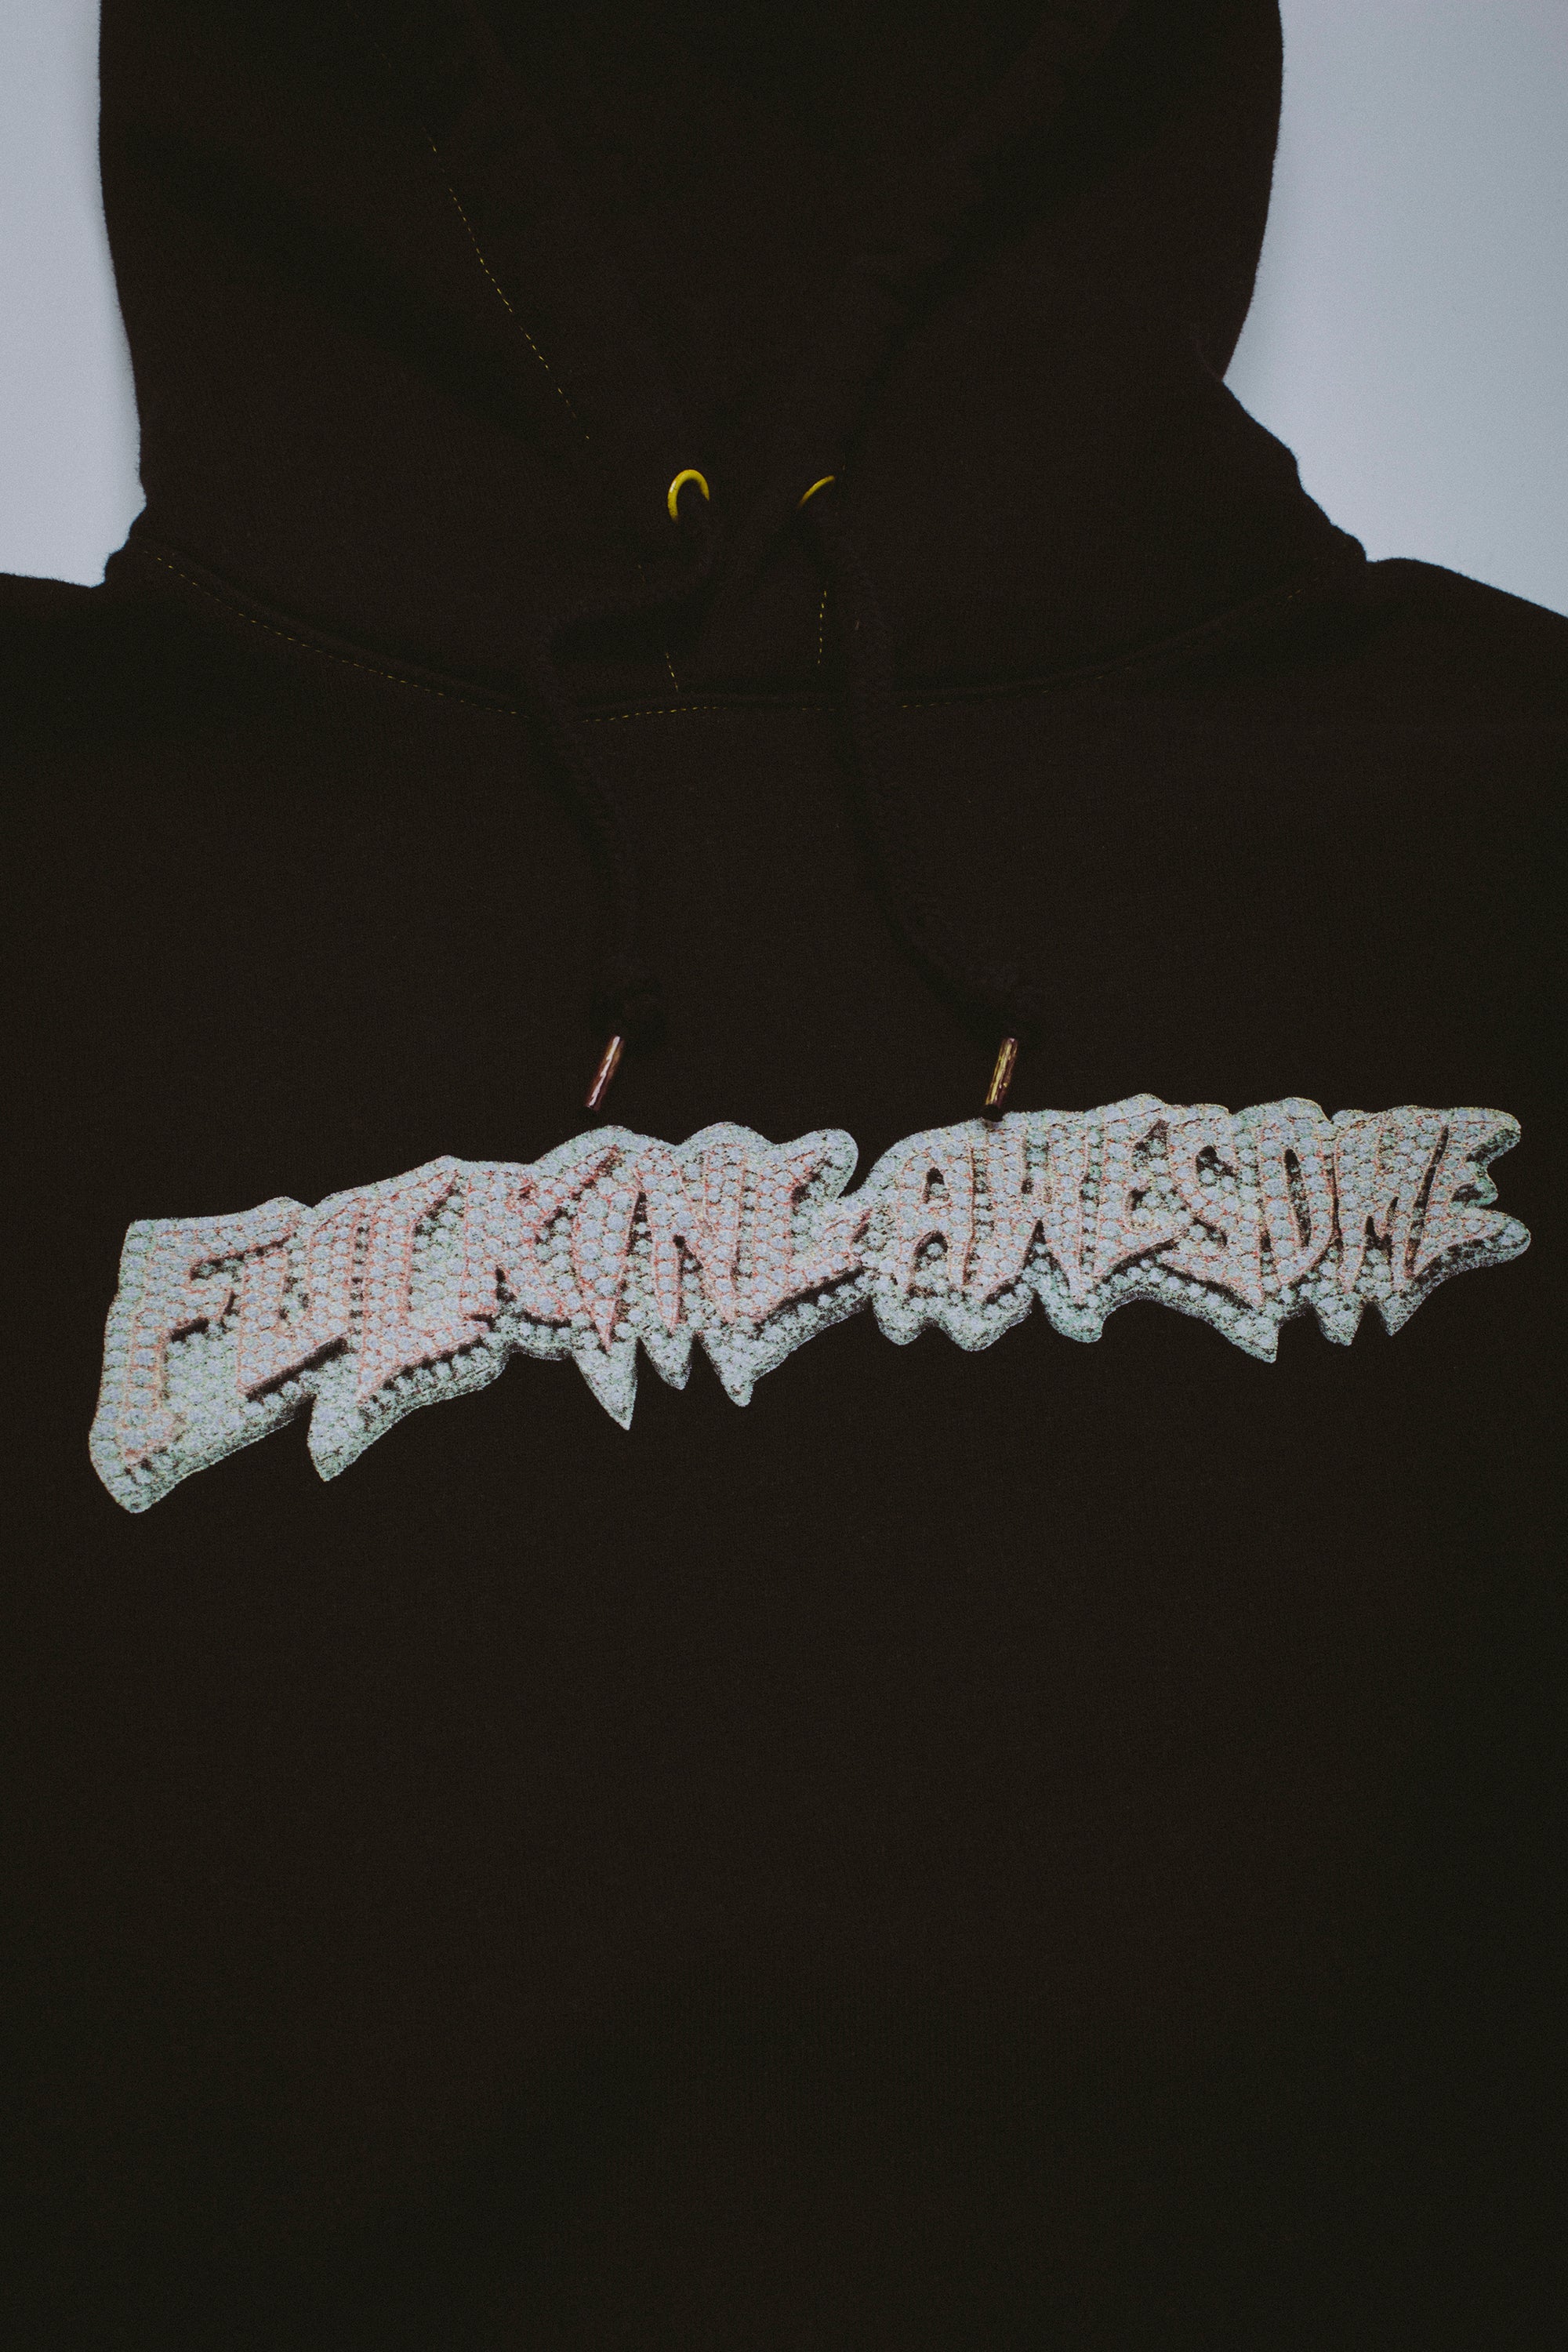 Overdyed 24k Stamp Hoodie – Fucking Awesome